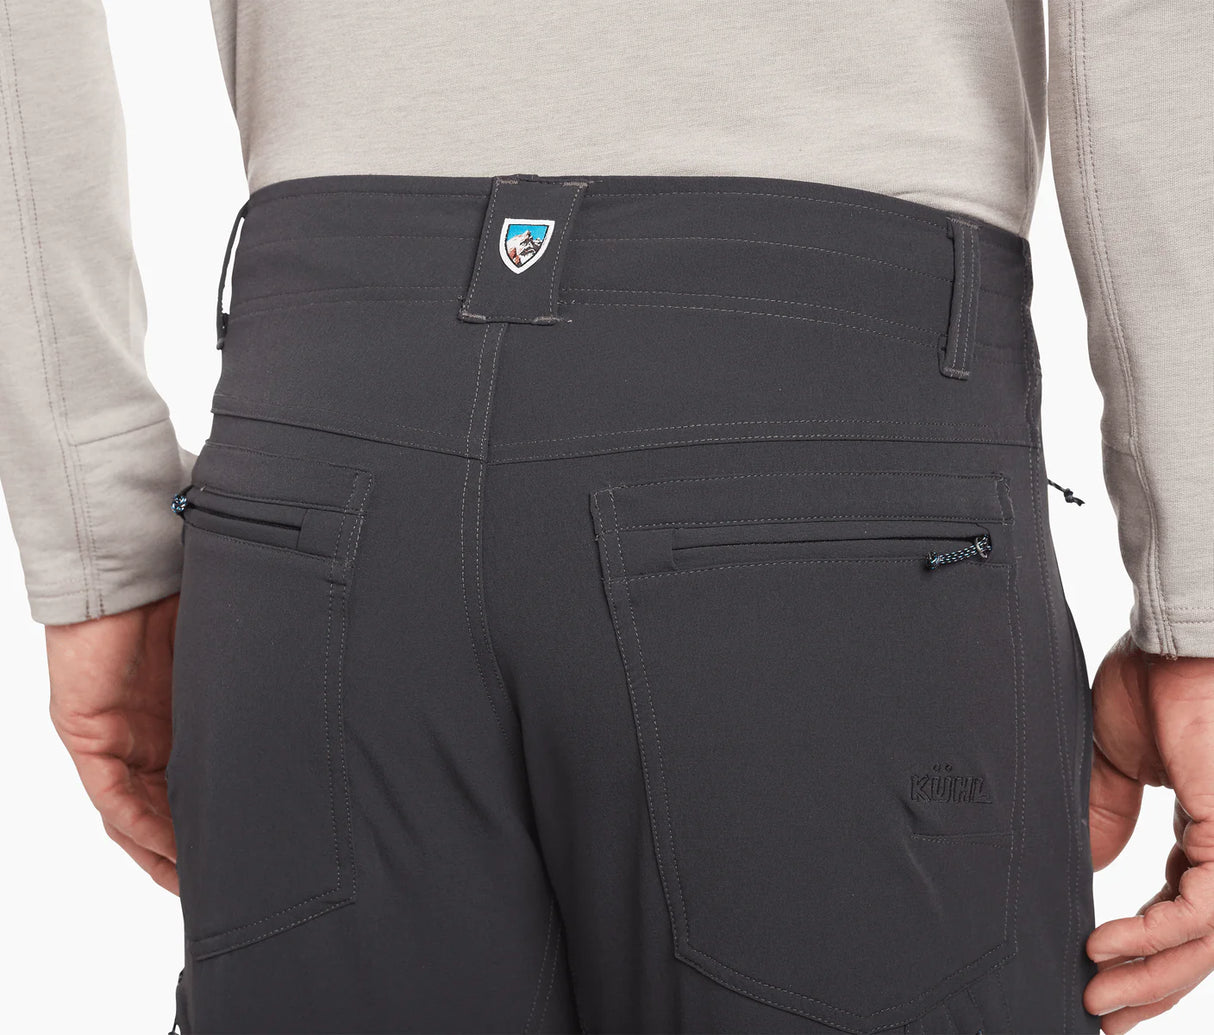 TRAVRSE™ Outdoor Pant: Water-repellent, stretchy, articulated knees, multiple pockets.